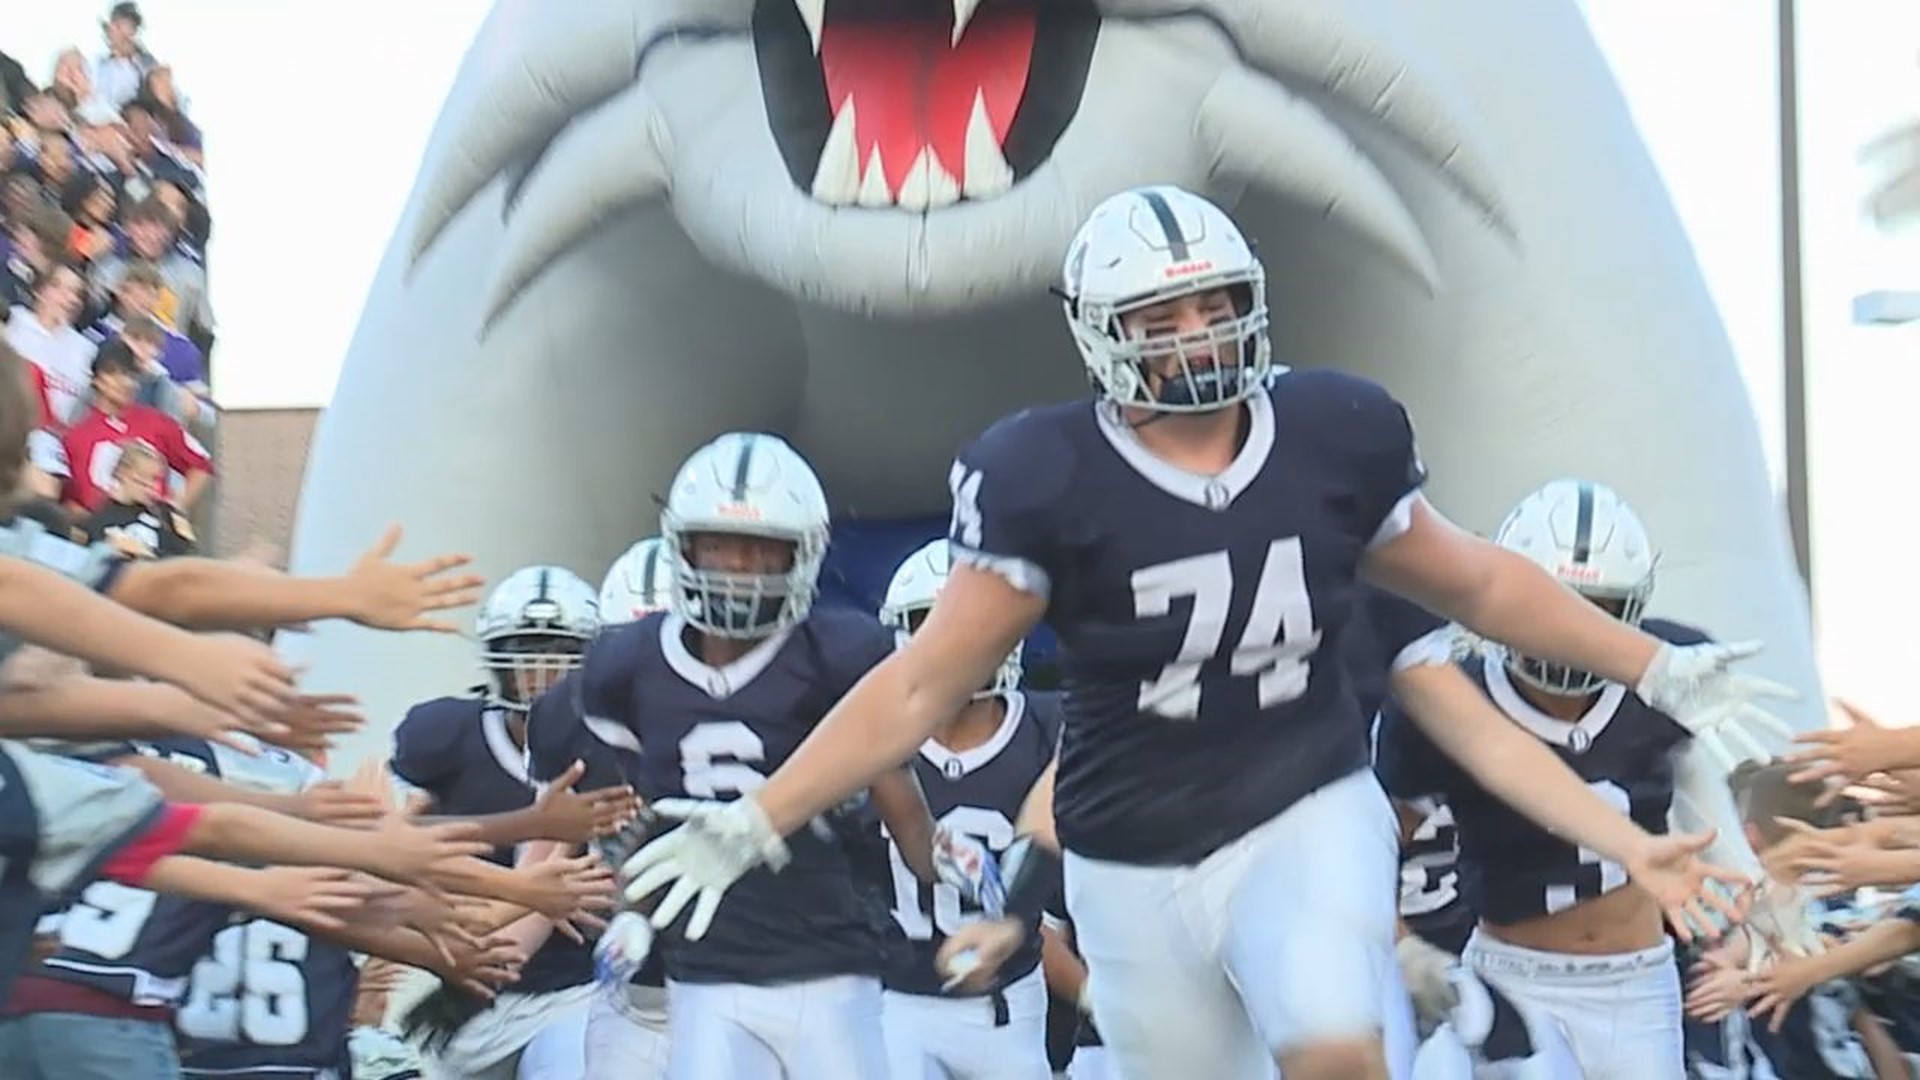 Dallastown makes a statement in their win over South Western.